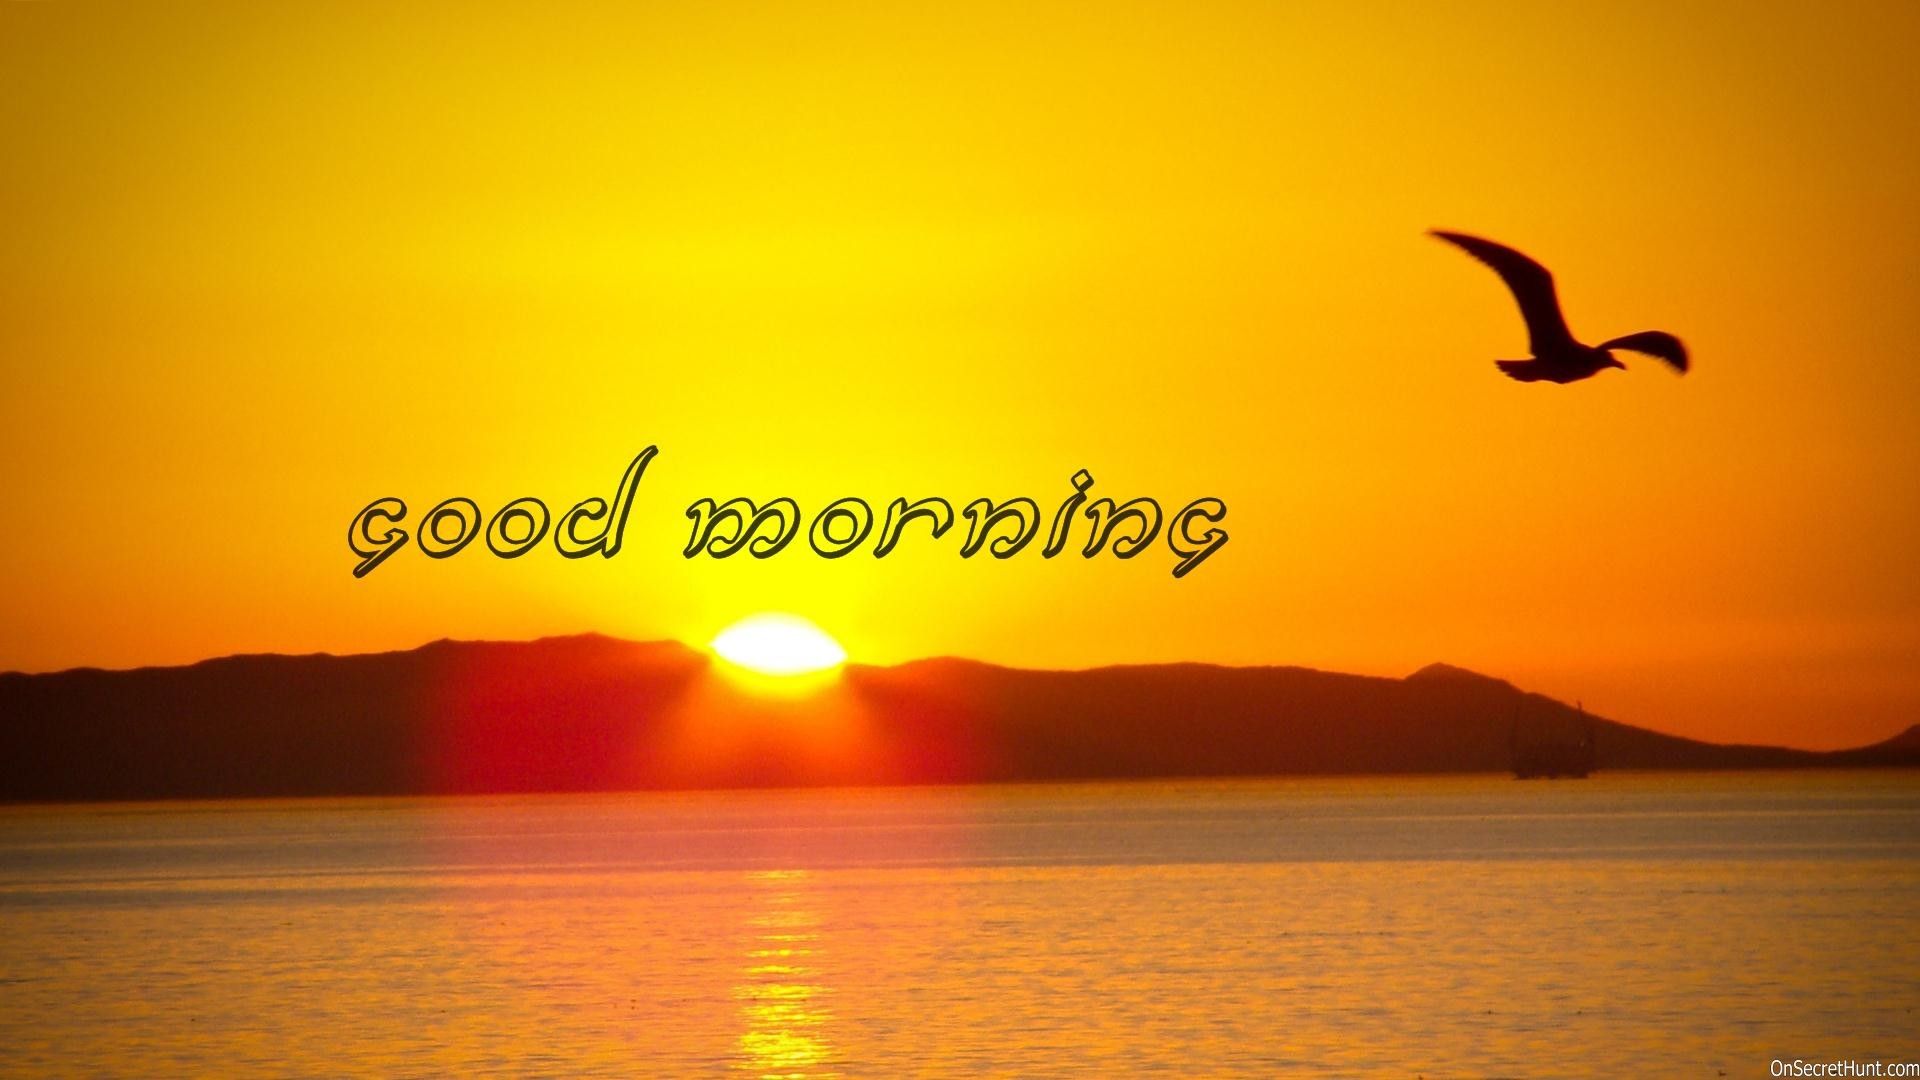 50+ Good Morning Sunrise Images - Good Morning Wishes with Sunrise Pictures  - Good Morning